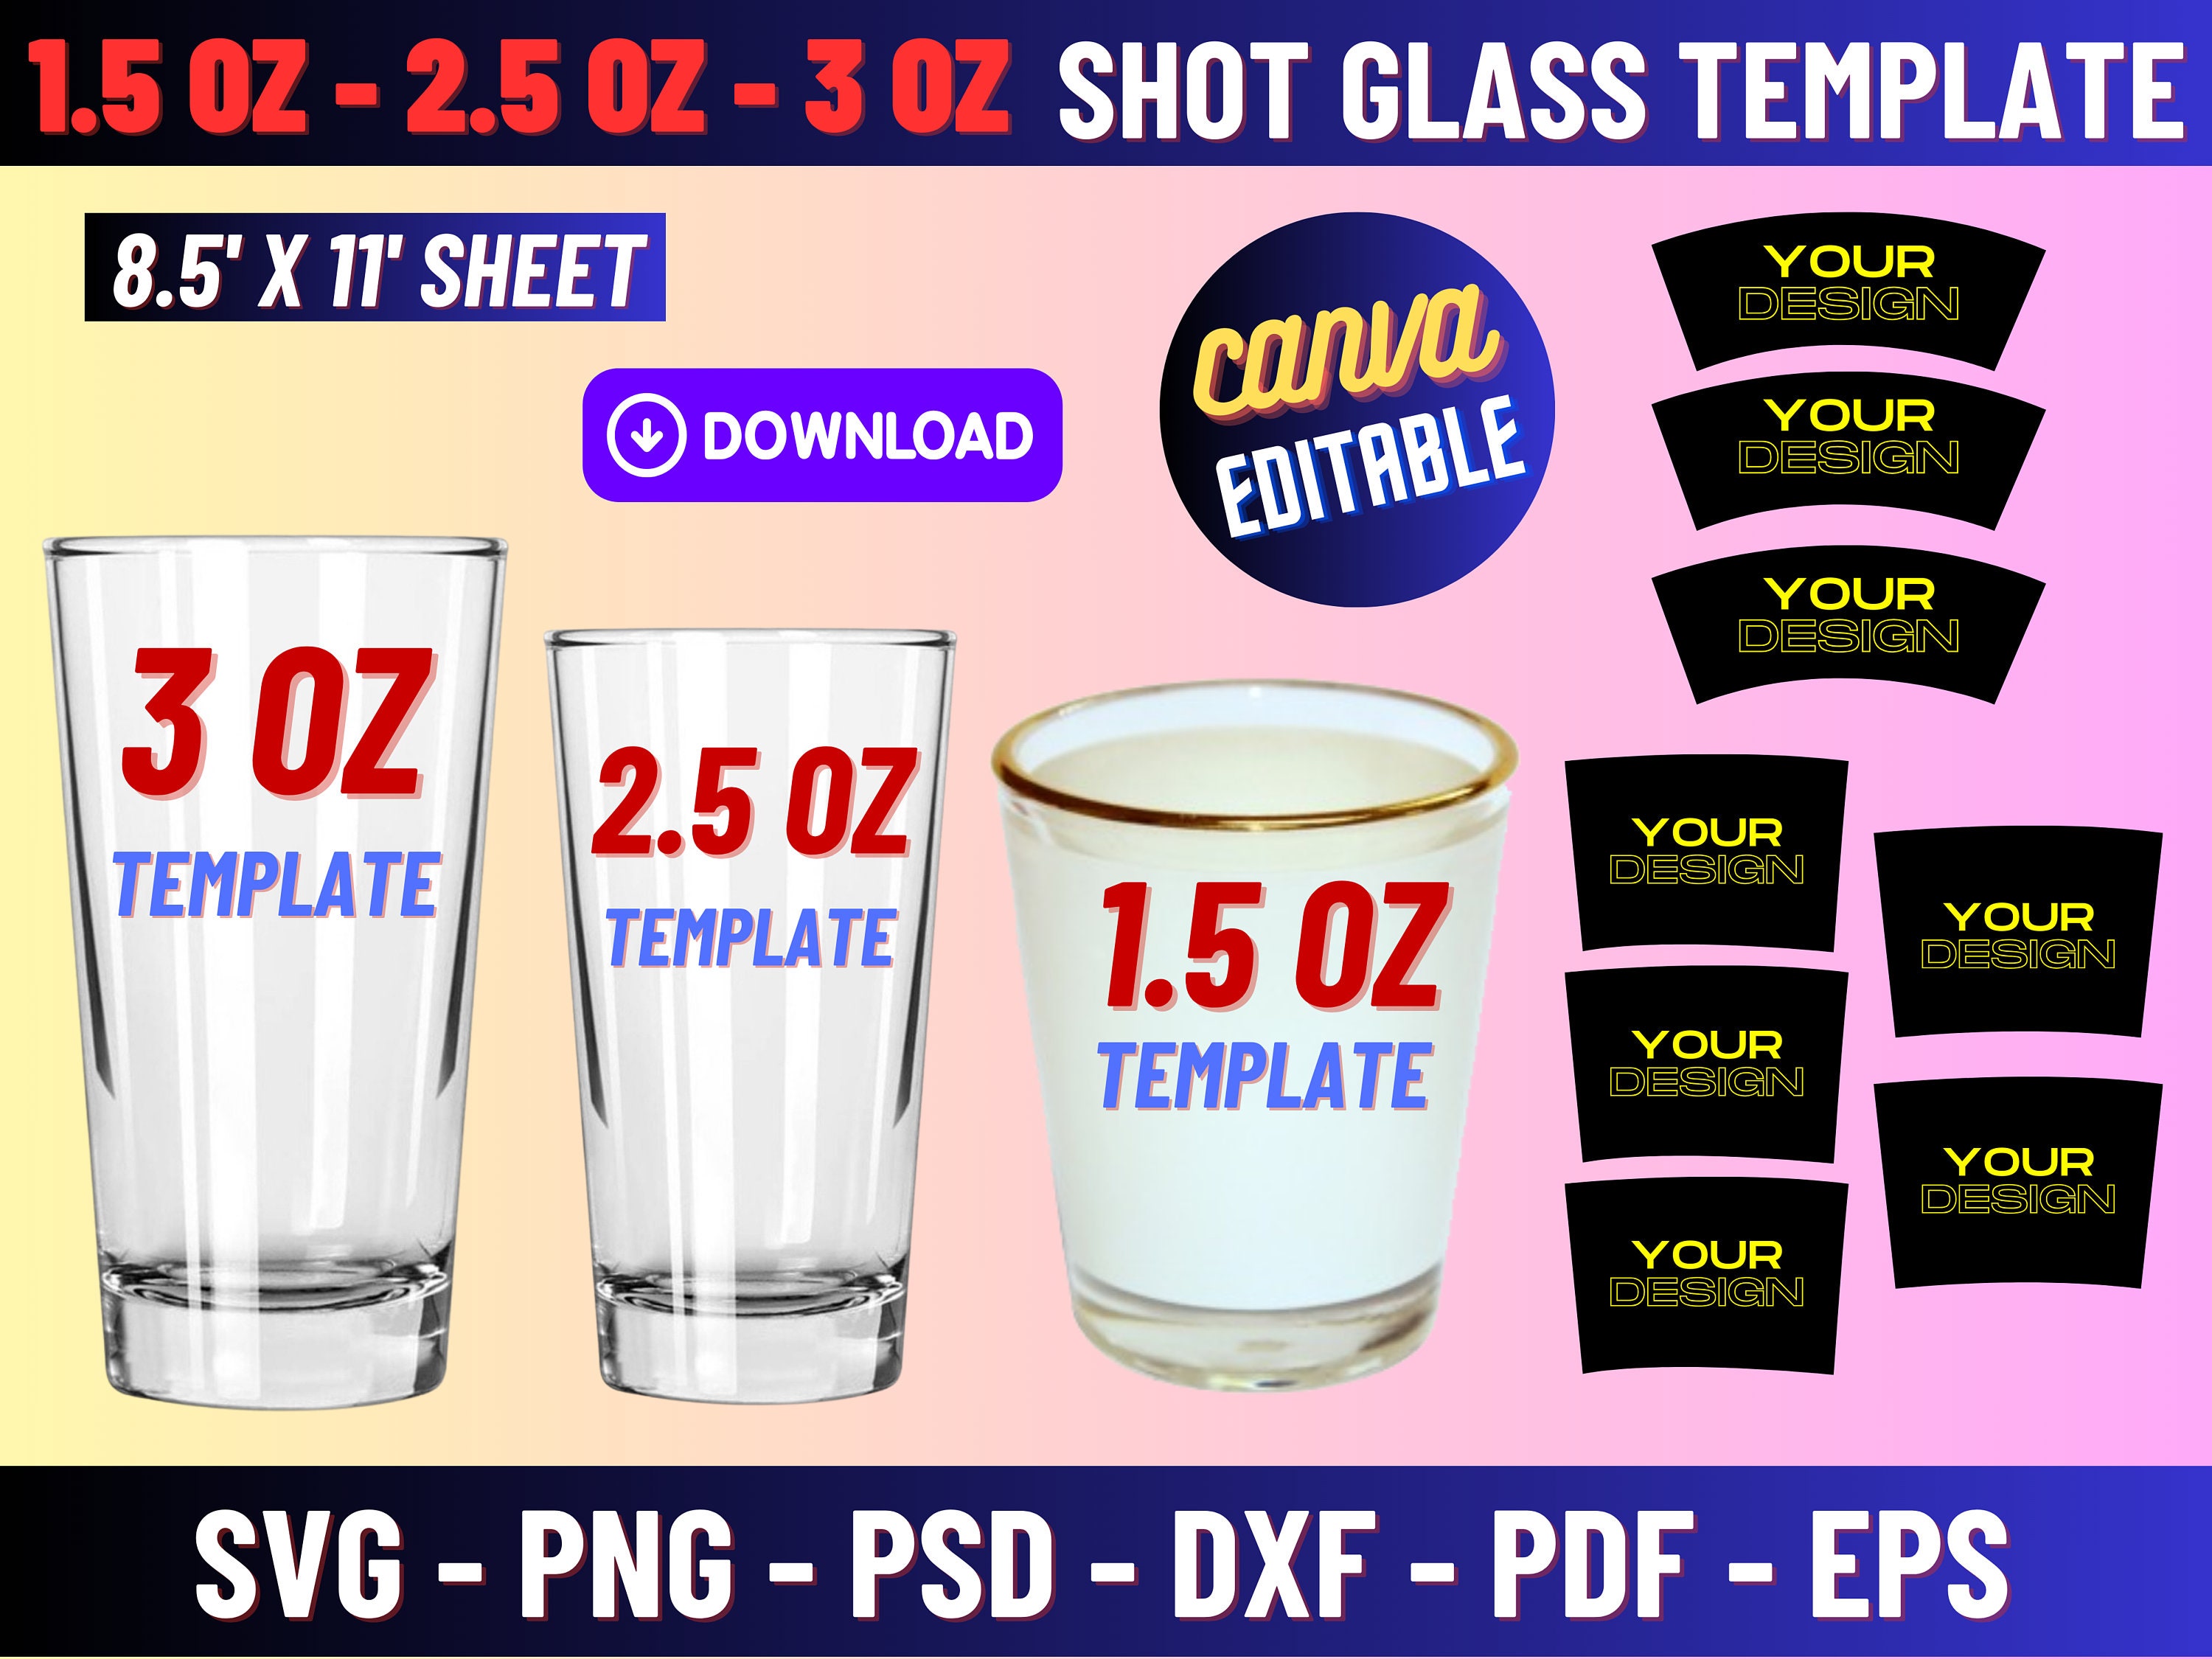 1.5oz Shot Glass Wrapper Sublimation Template 8.5x11 Sheet SVG, PNG, PSD  and Docx 